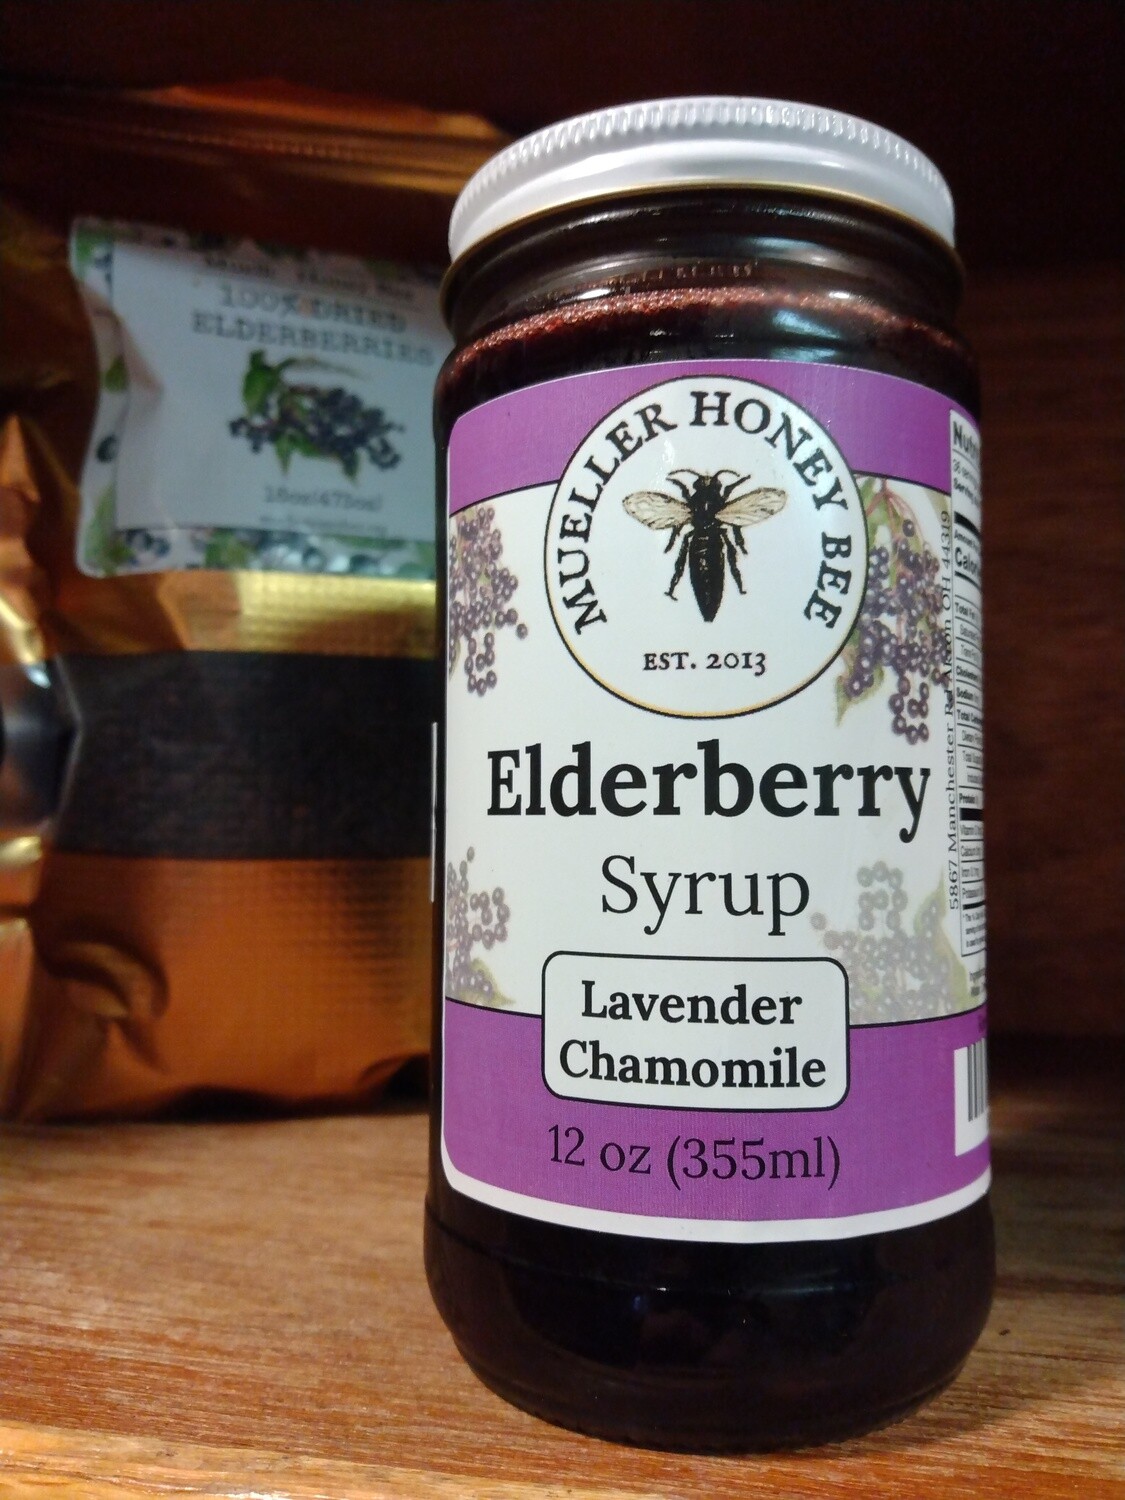 12 oz Lavender and Chamomile Elderberry Syrup